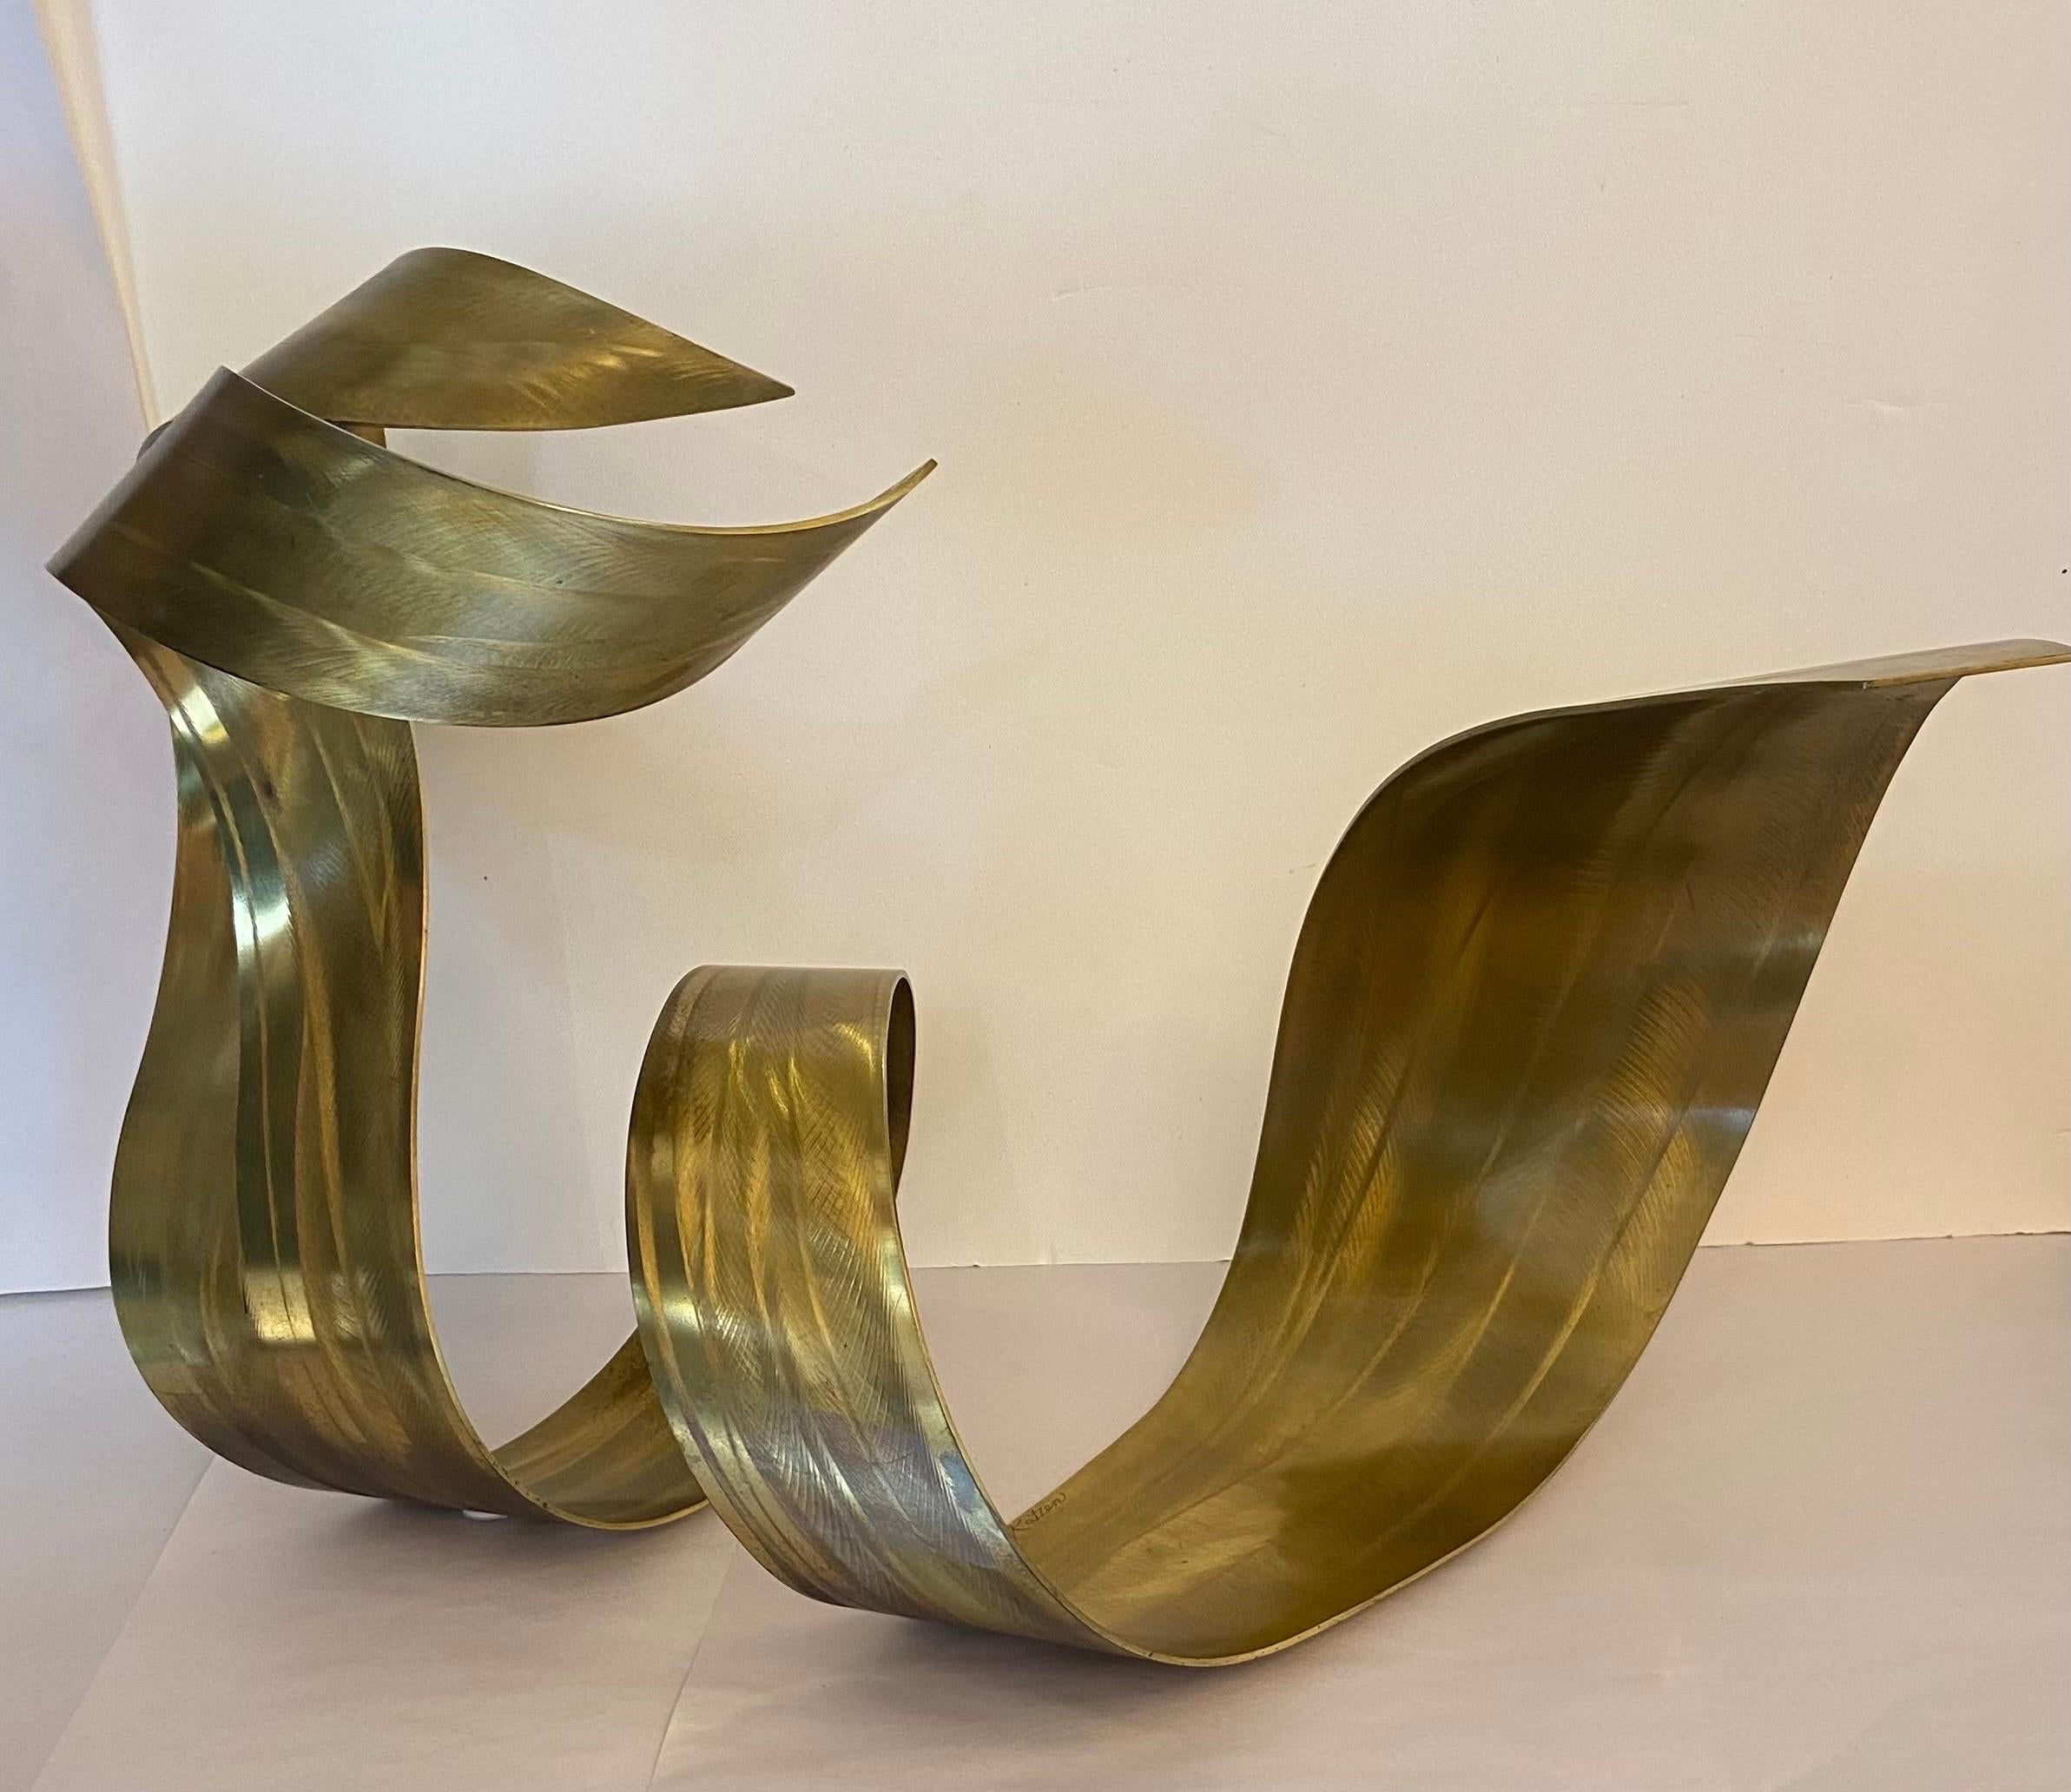 A ribbon design sculpture in varying widths and heights. Etched brass design  .A. Unique sculpture.. 
Not part of a series. Approximately 37” x 24” tall by 17 inches wide